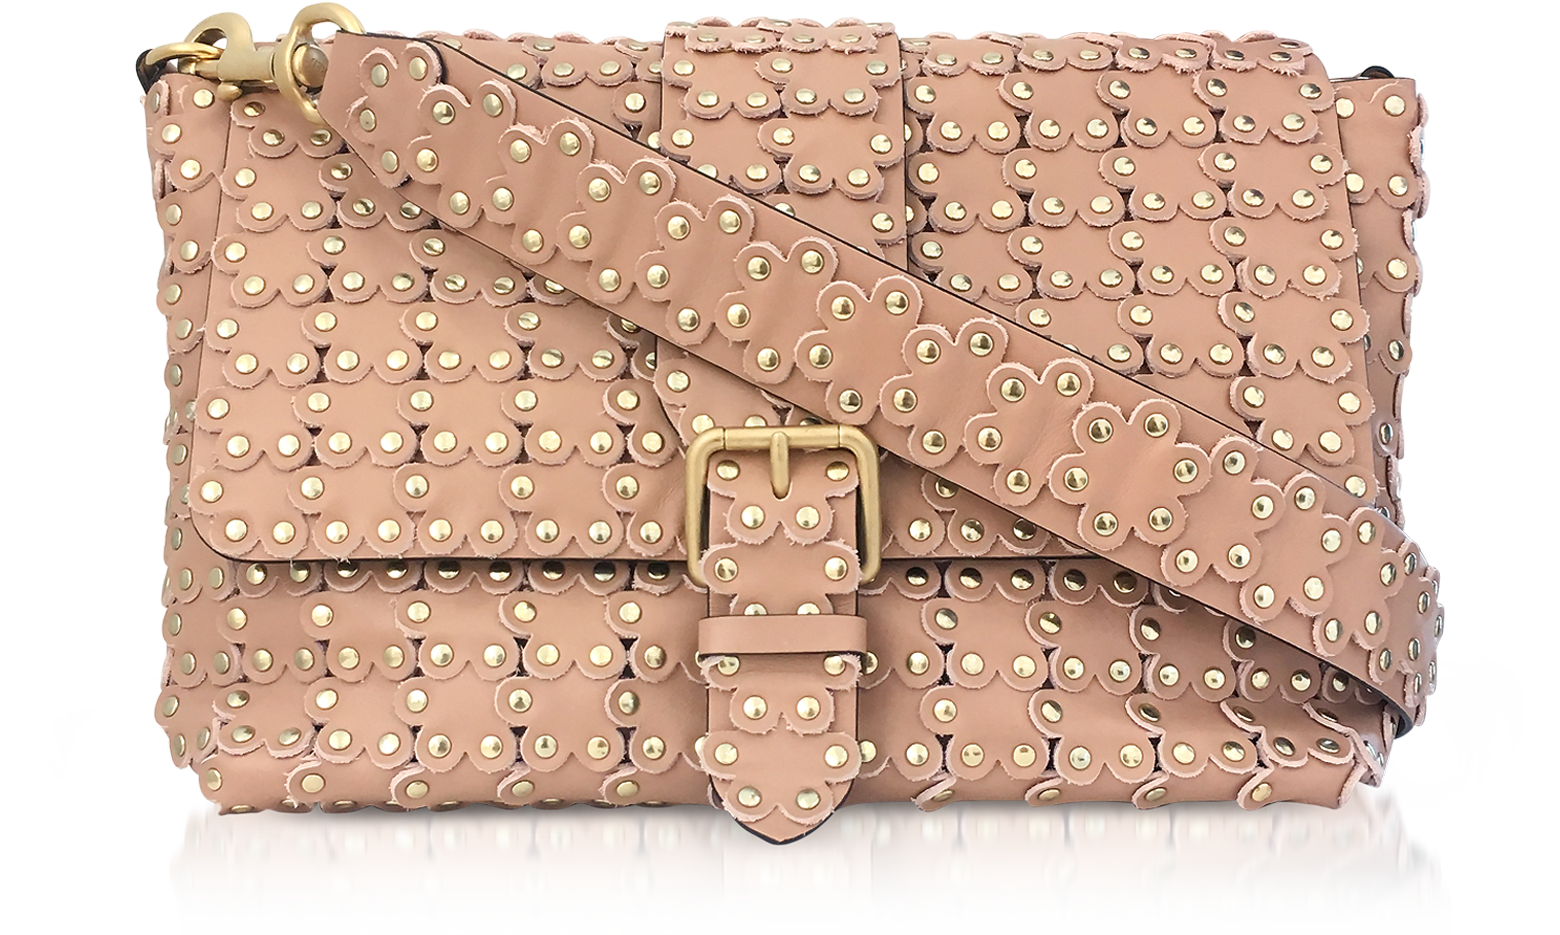 RED Valentino Nude Leather Small Ruffle Shoulder Bag at FORZIERI